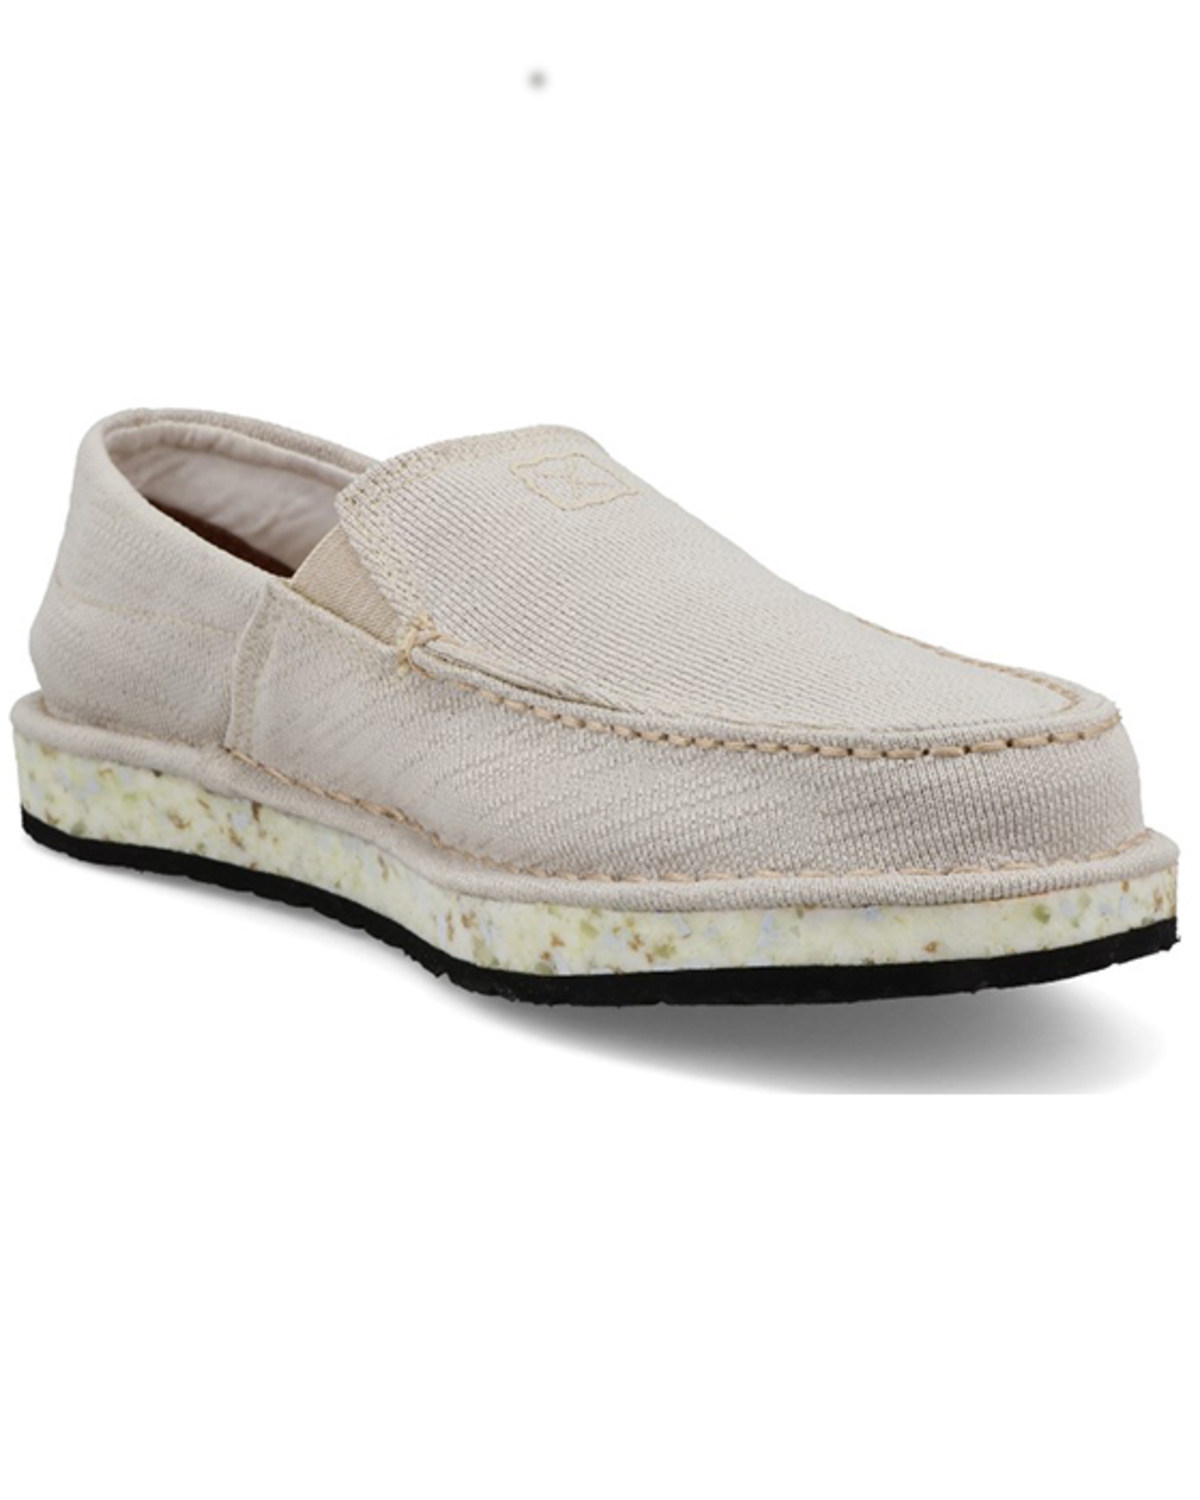 Twisted X Women's Circular Project Slip-On Casual Shoes - Moc Toe